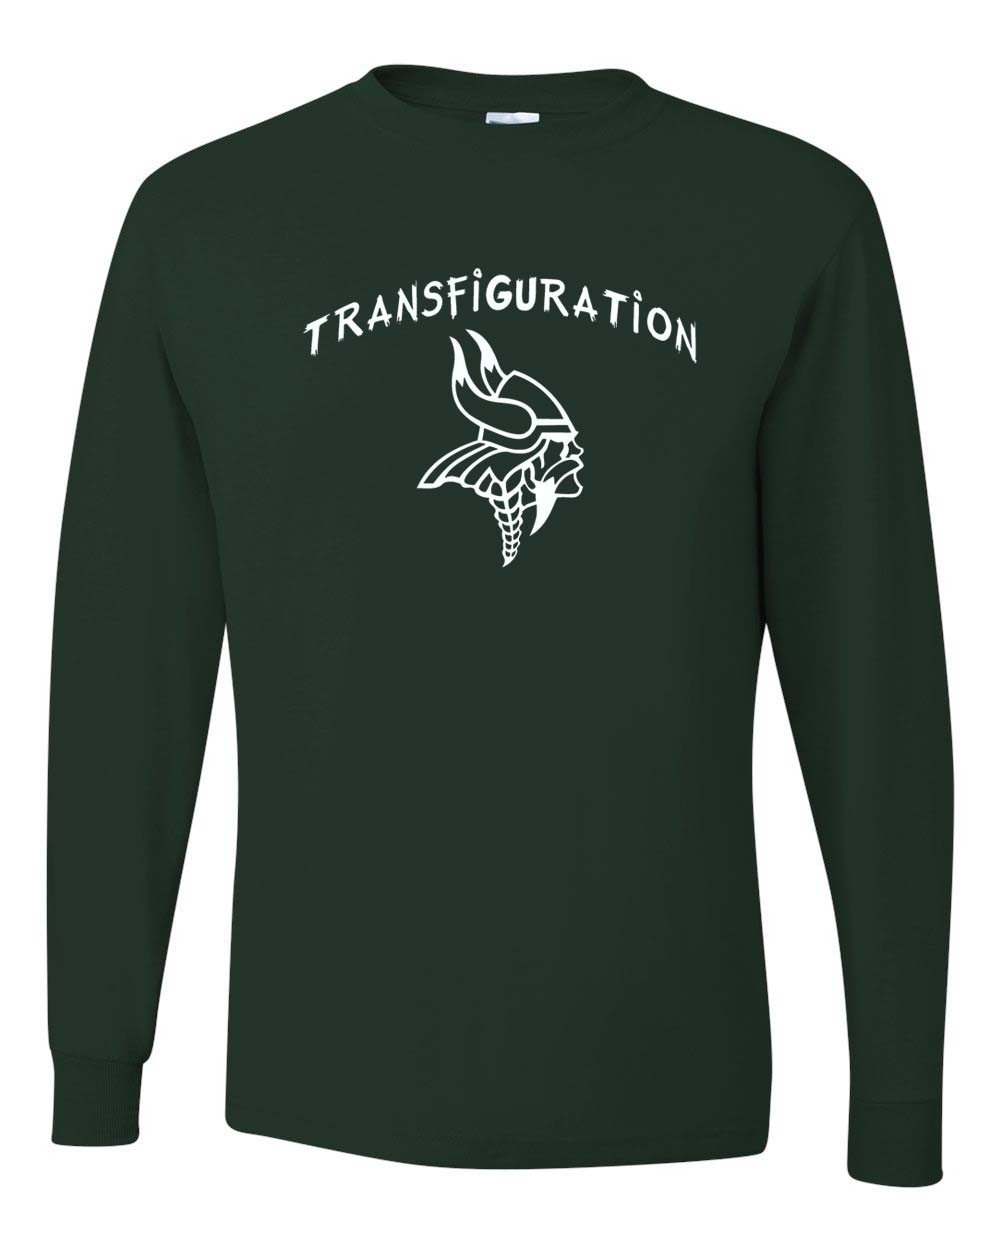 Transfiguration L/S Green Gym T-Shirt w/ School Logo *Sale Price is in stock only